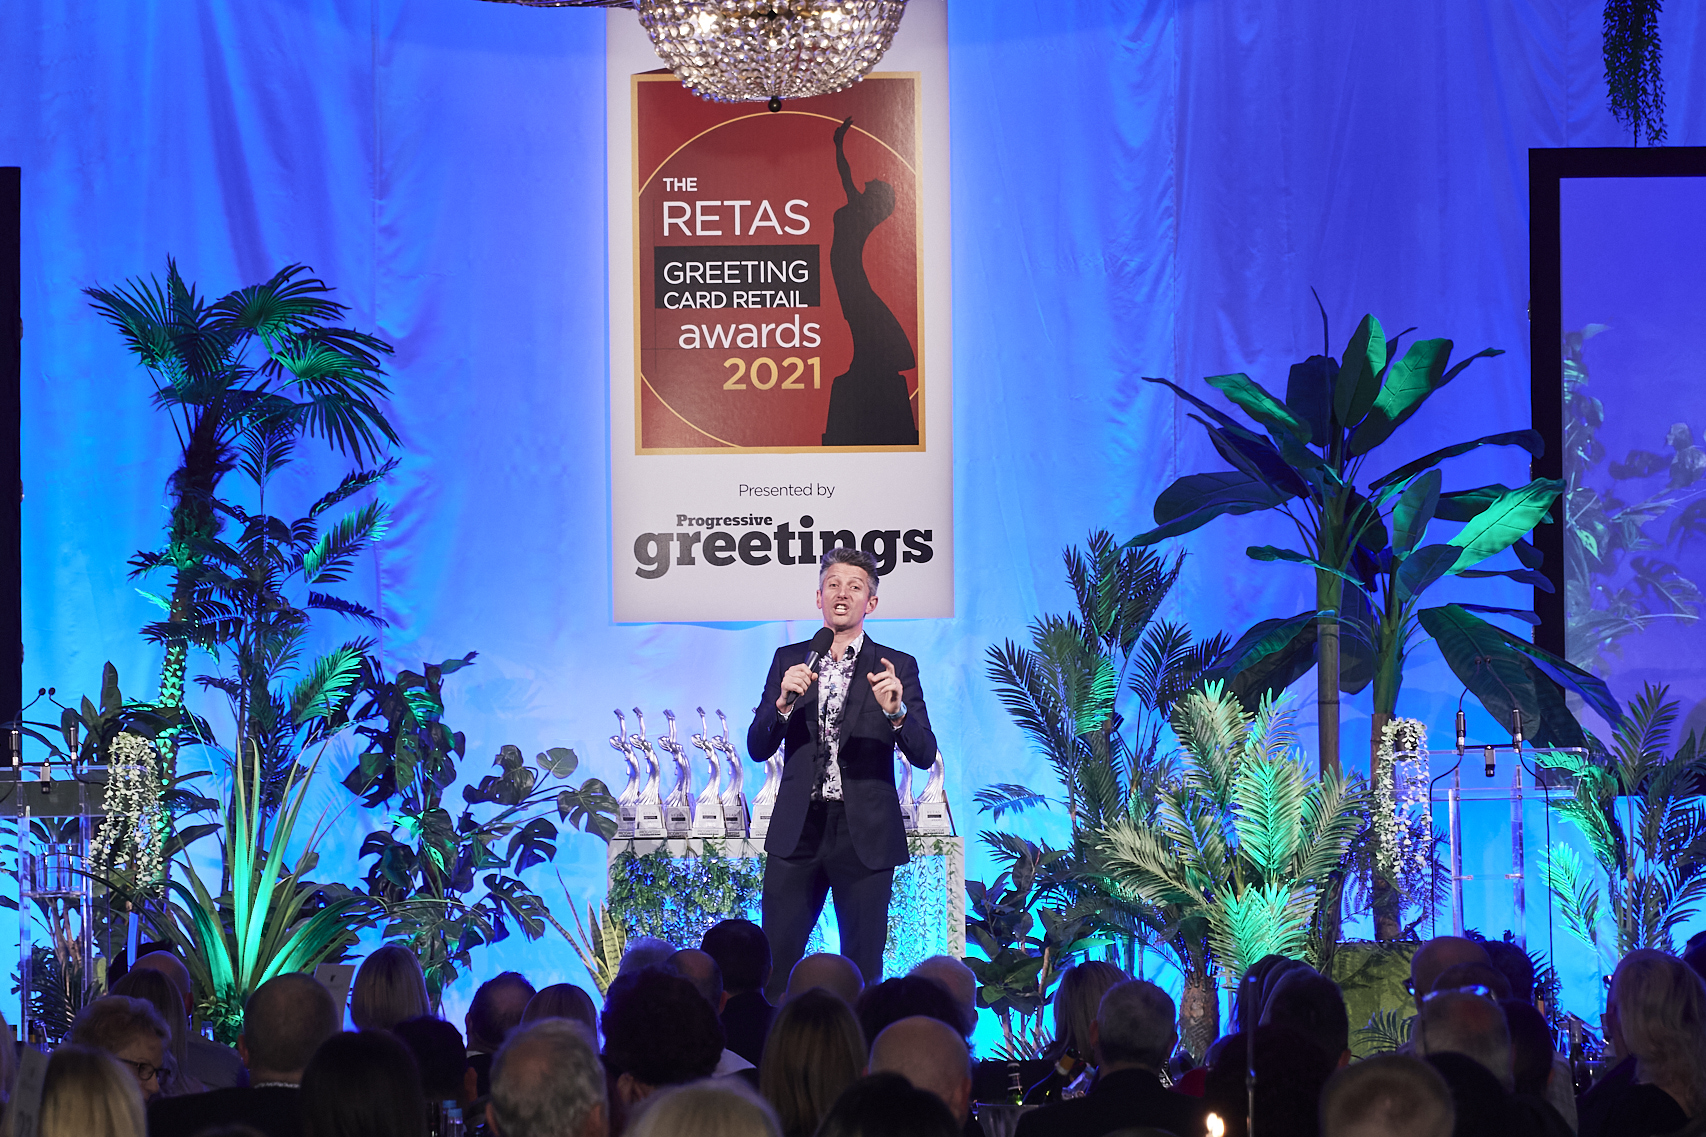 Above: Host Stuart Goldsmith on the Finery of Greenery stage at The Retas.